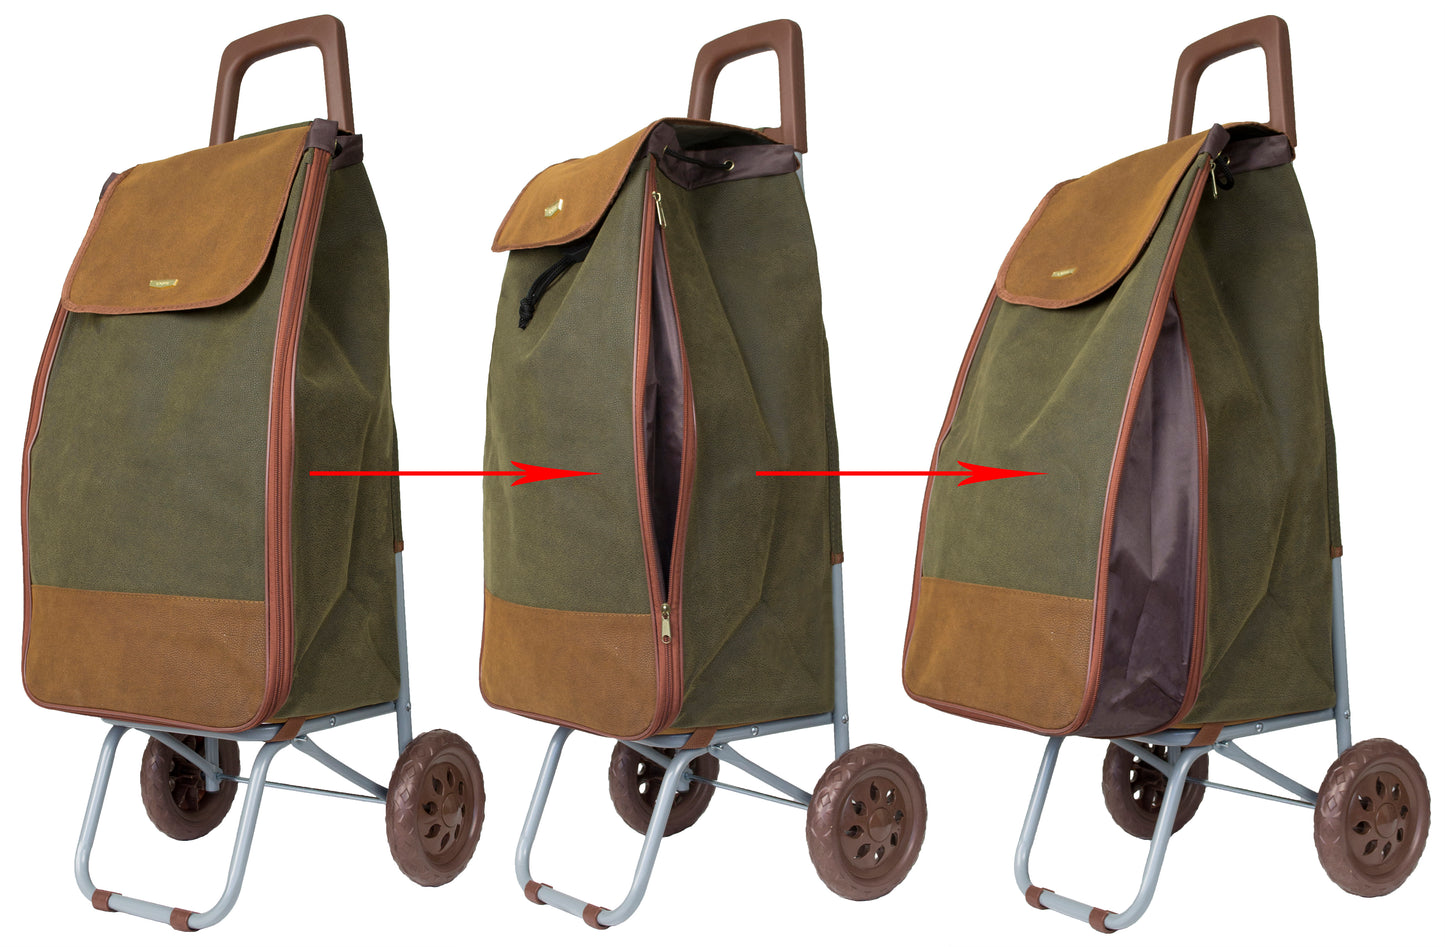 Shopping Trolley with Extendable Bag 38.5L